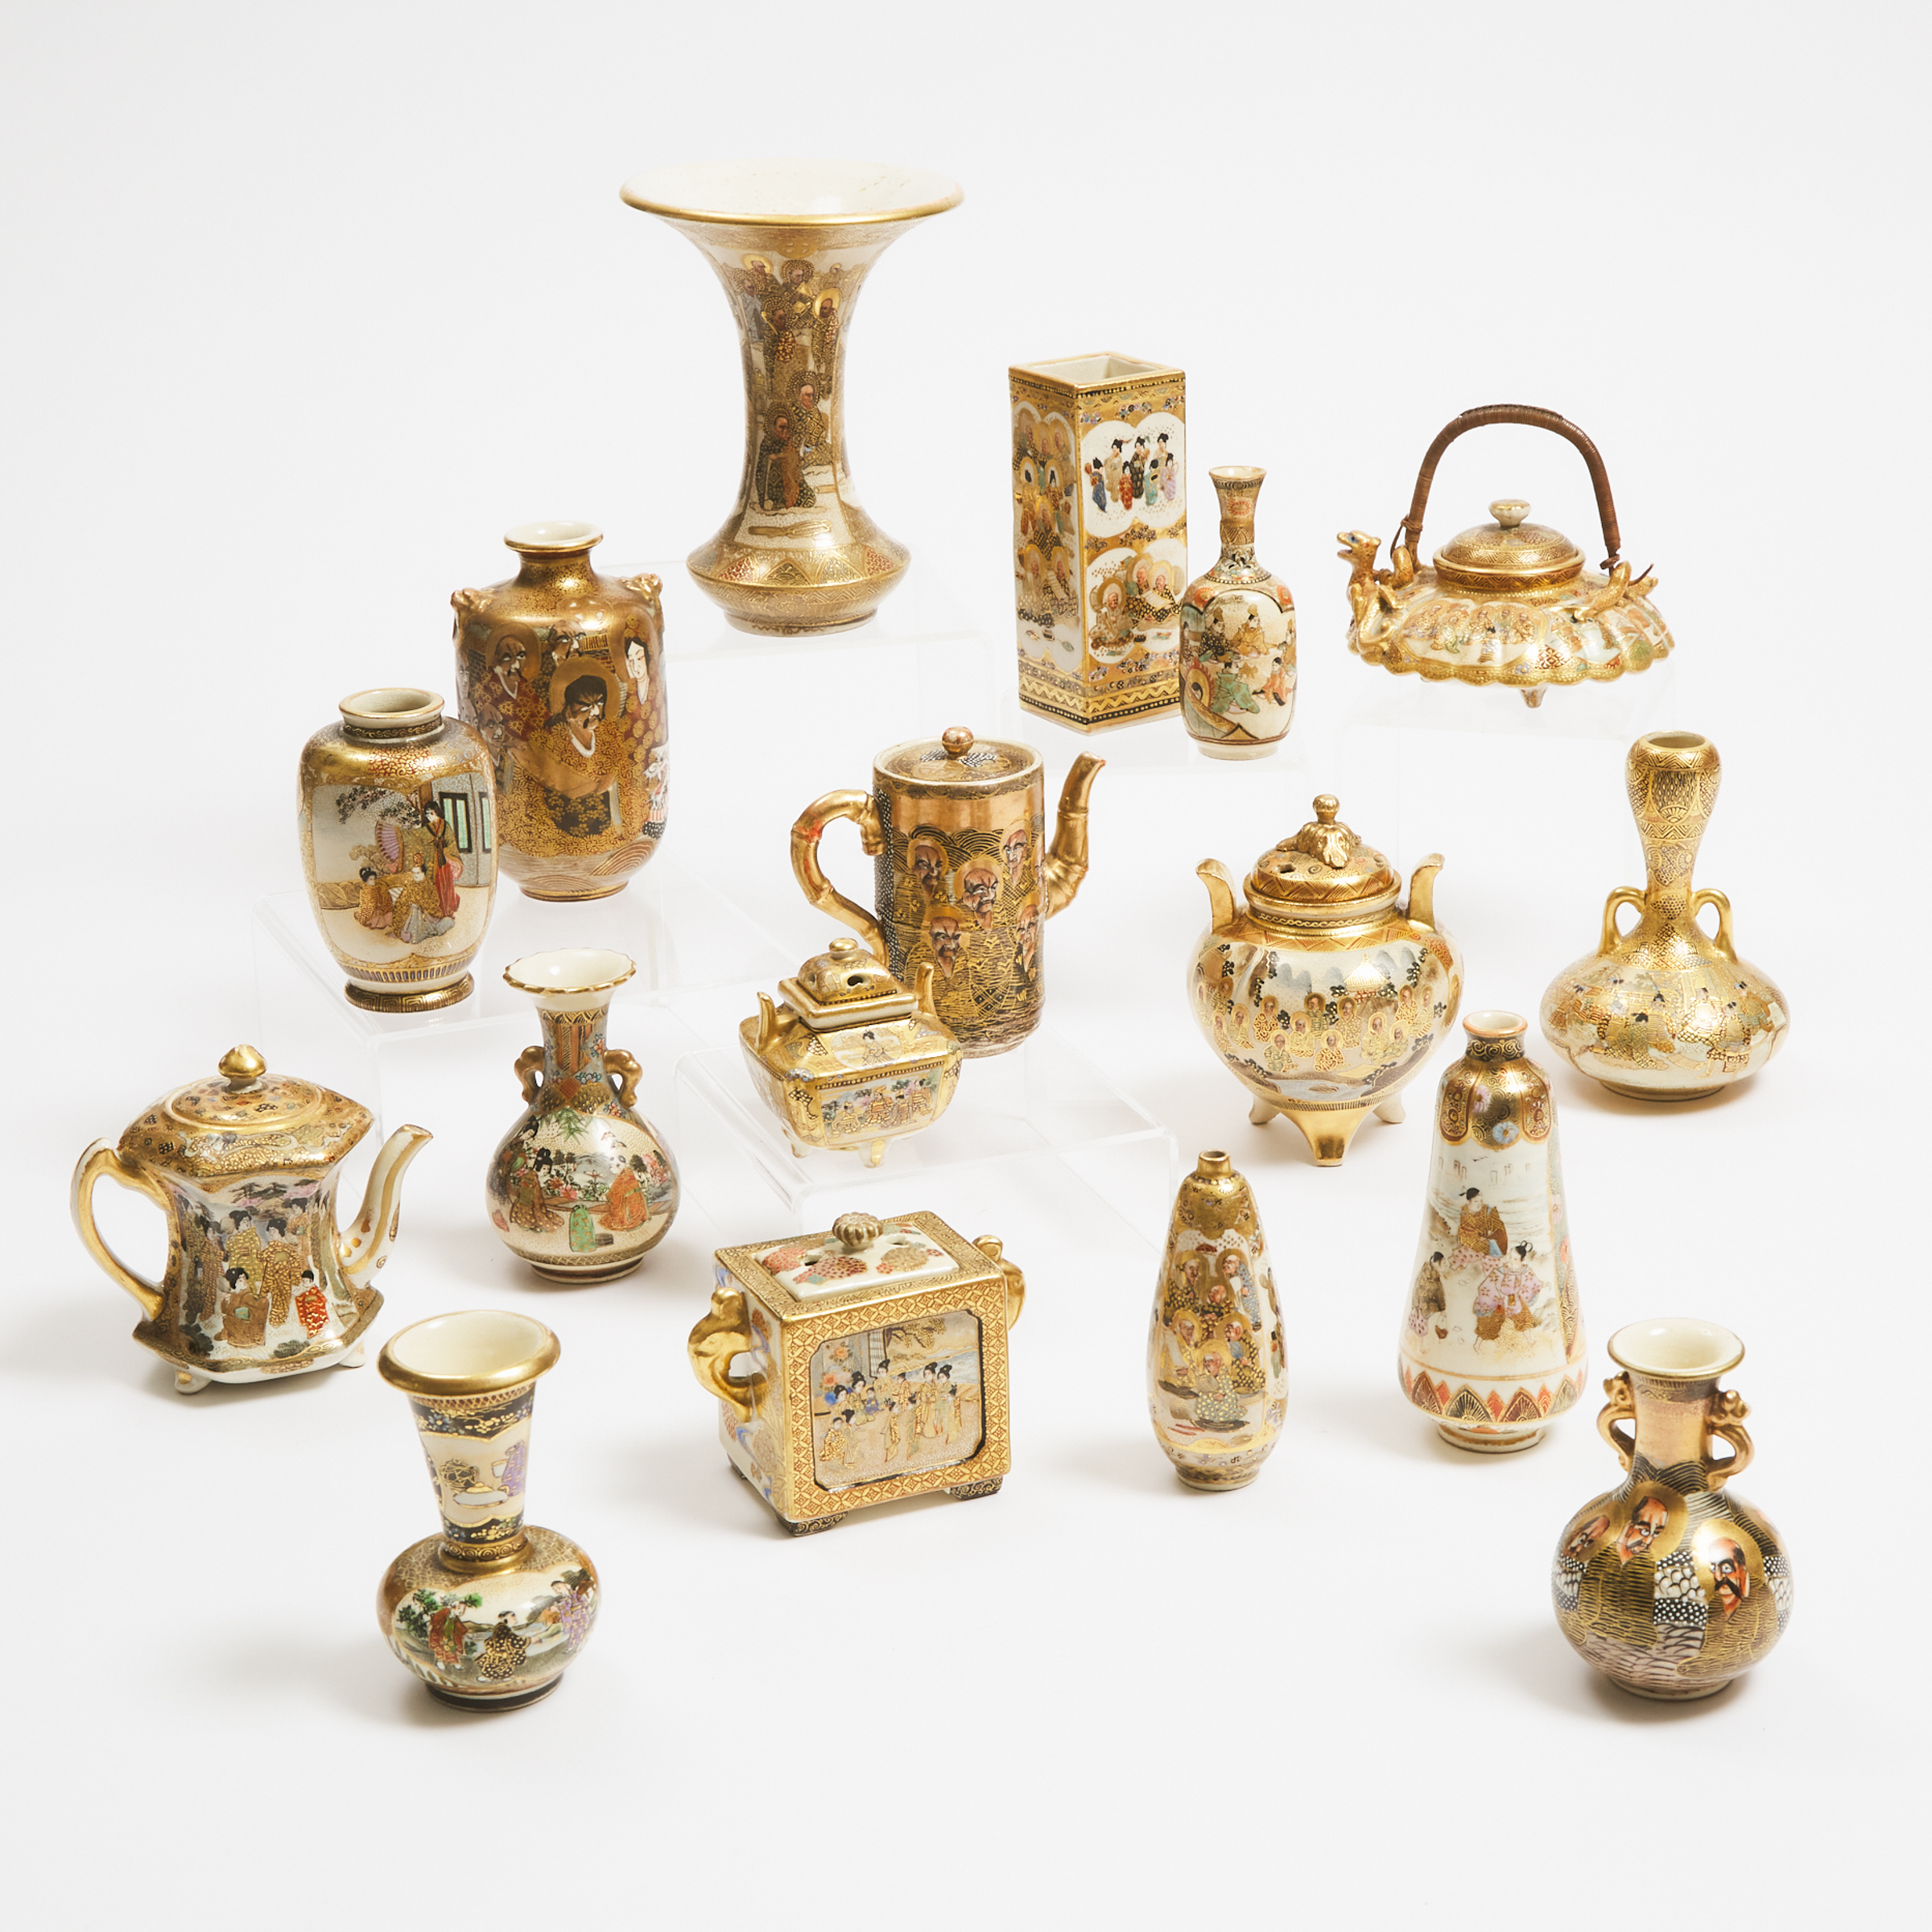 A Group of Seventeen Miniature Satsuma Vases, Teapots, and Censers, Meiji/Taisho Period (1868-1926)